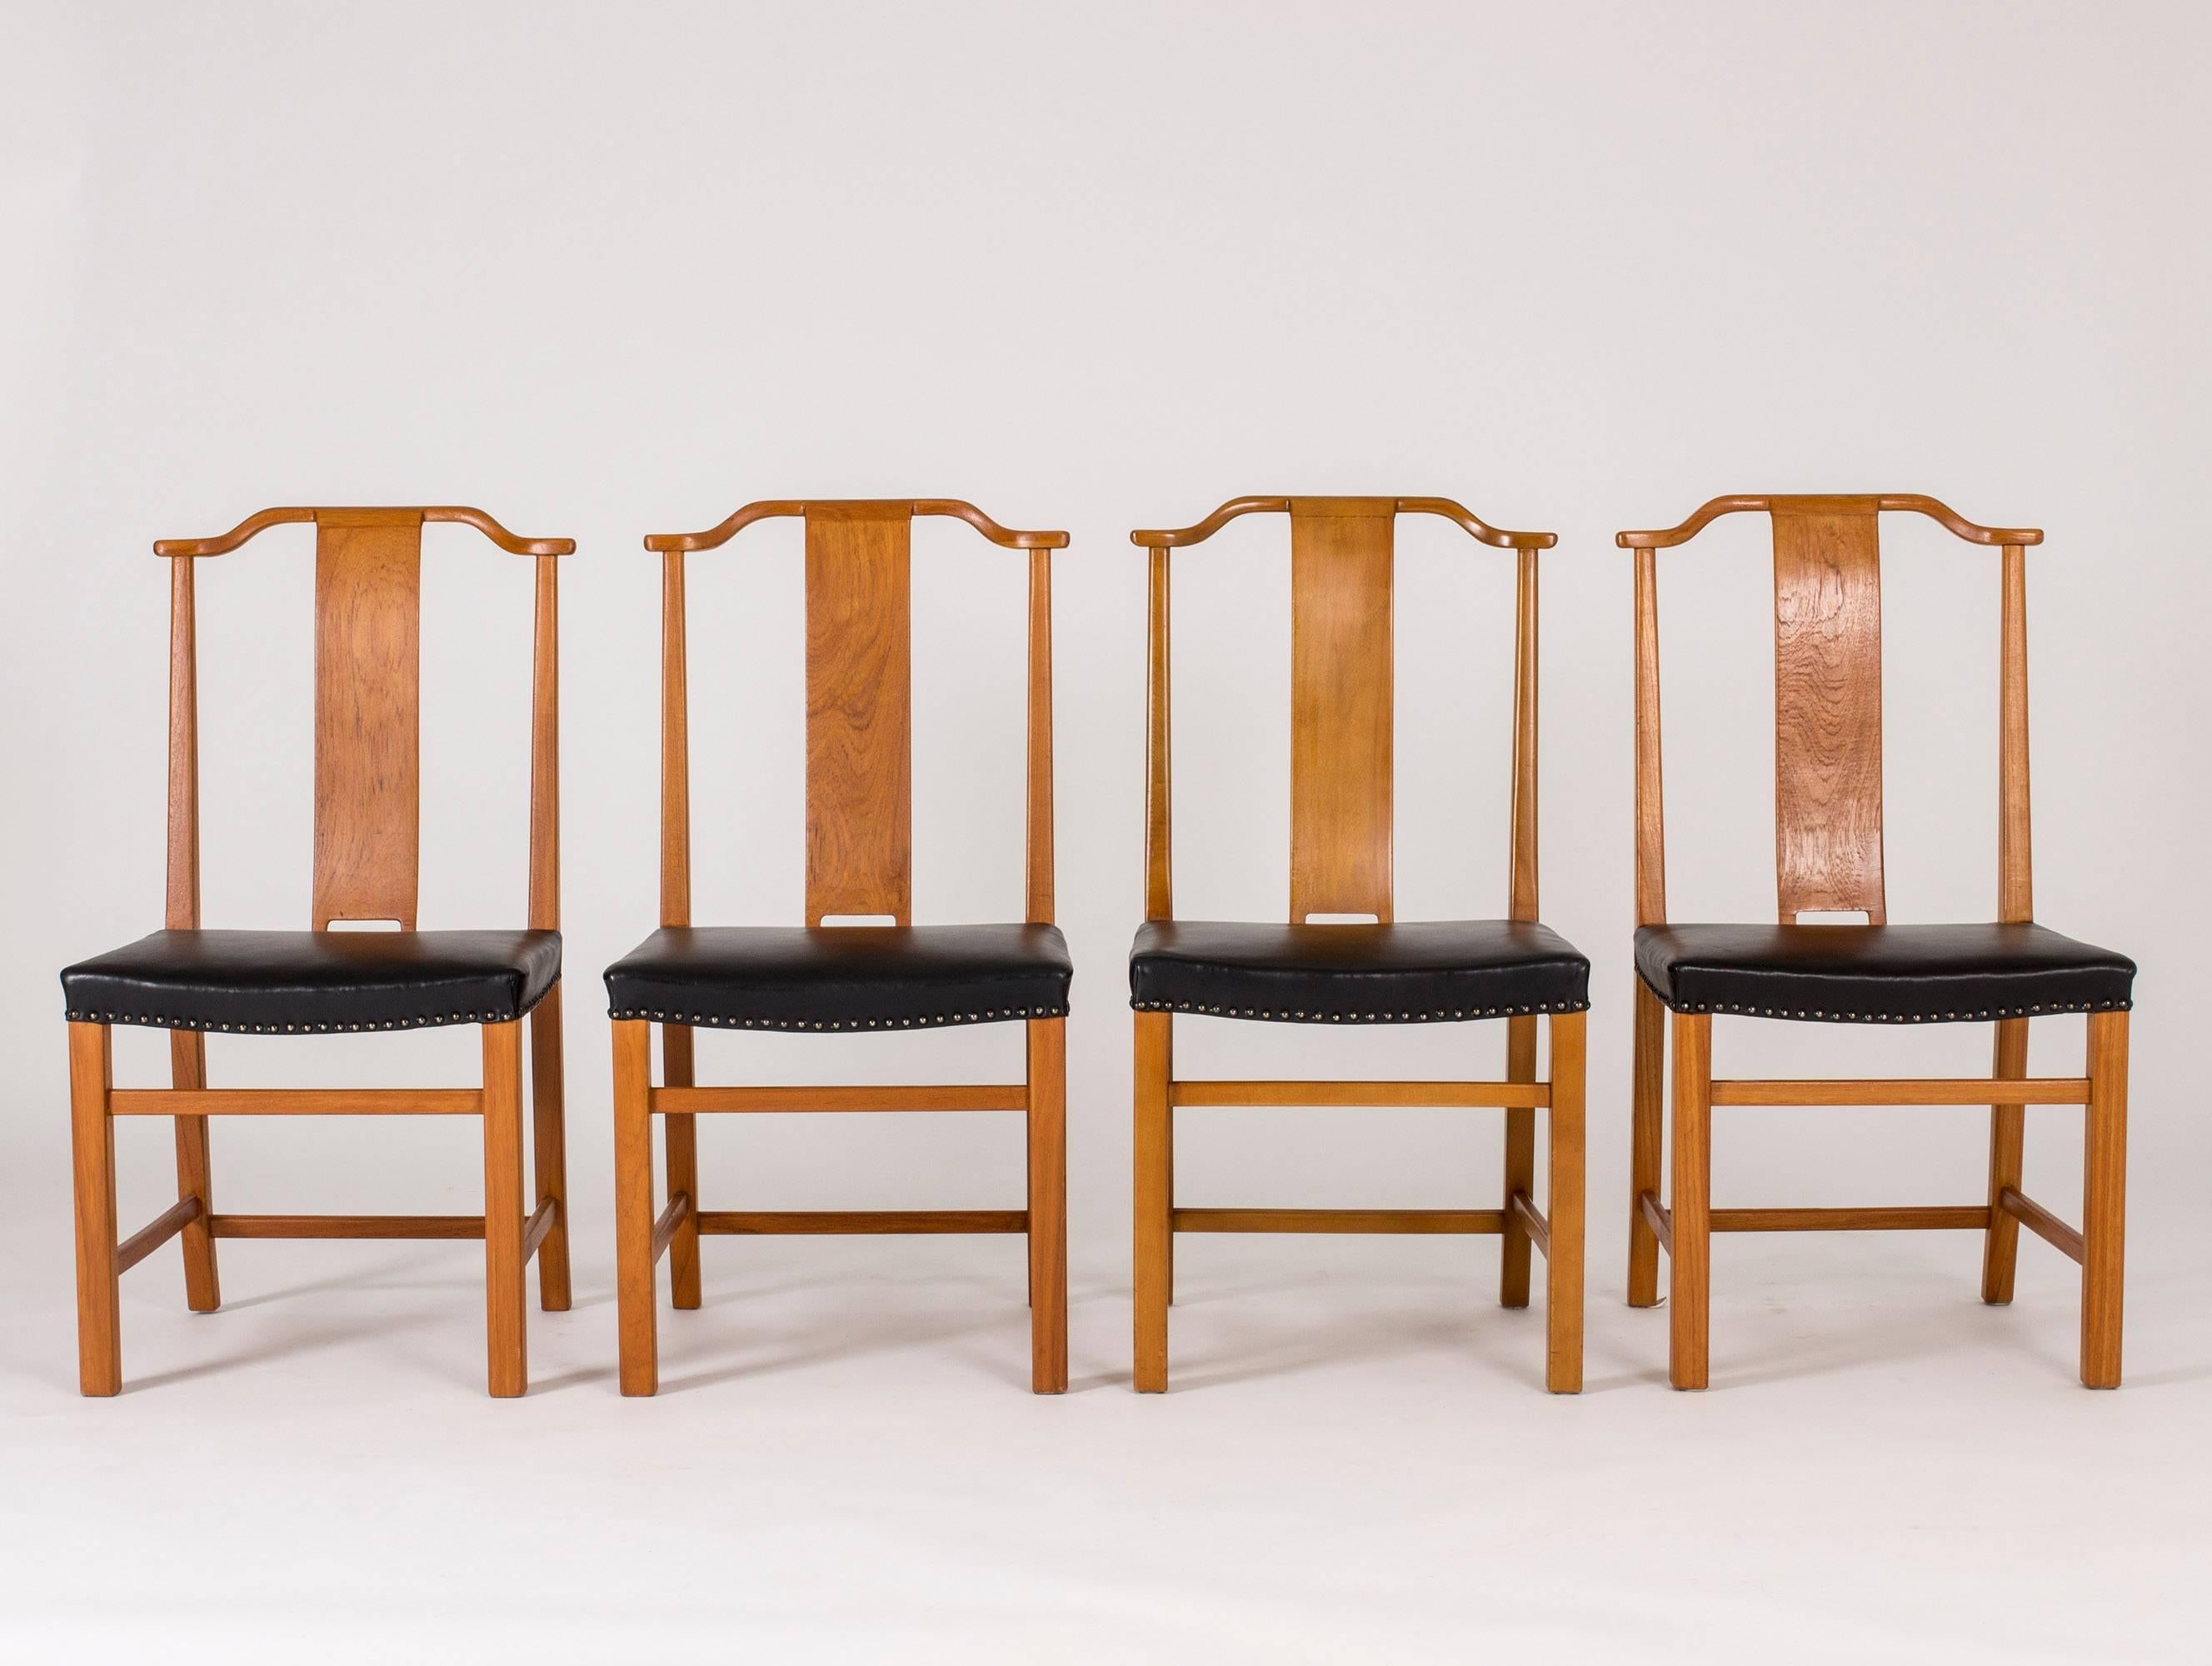 Set of 12 beautiful dining chairs in stained elmwood and leather by Axel Larsson, custom-made for a Swedish Court of Appeals. Dignified design with tall backs, discreet curves and a stable base.